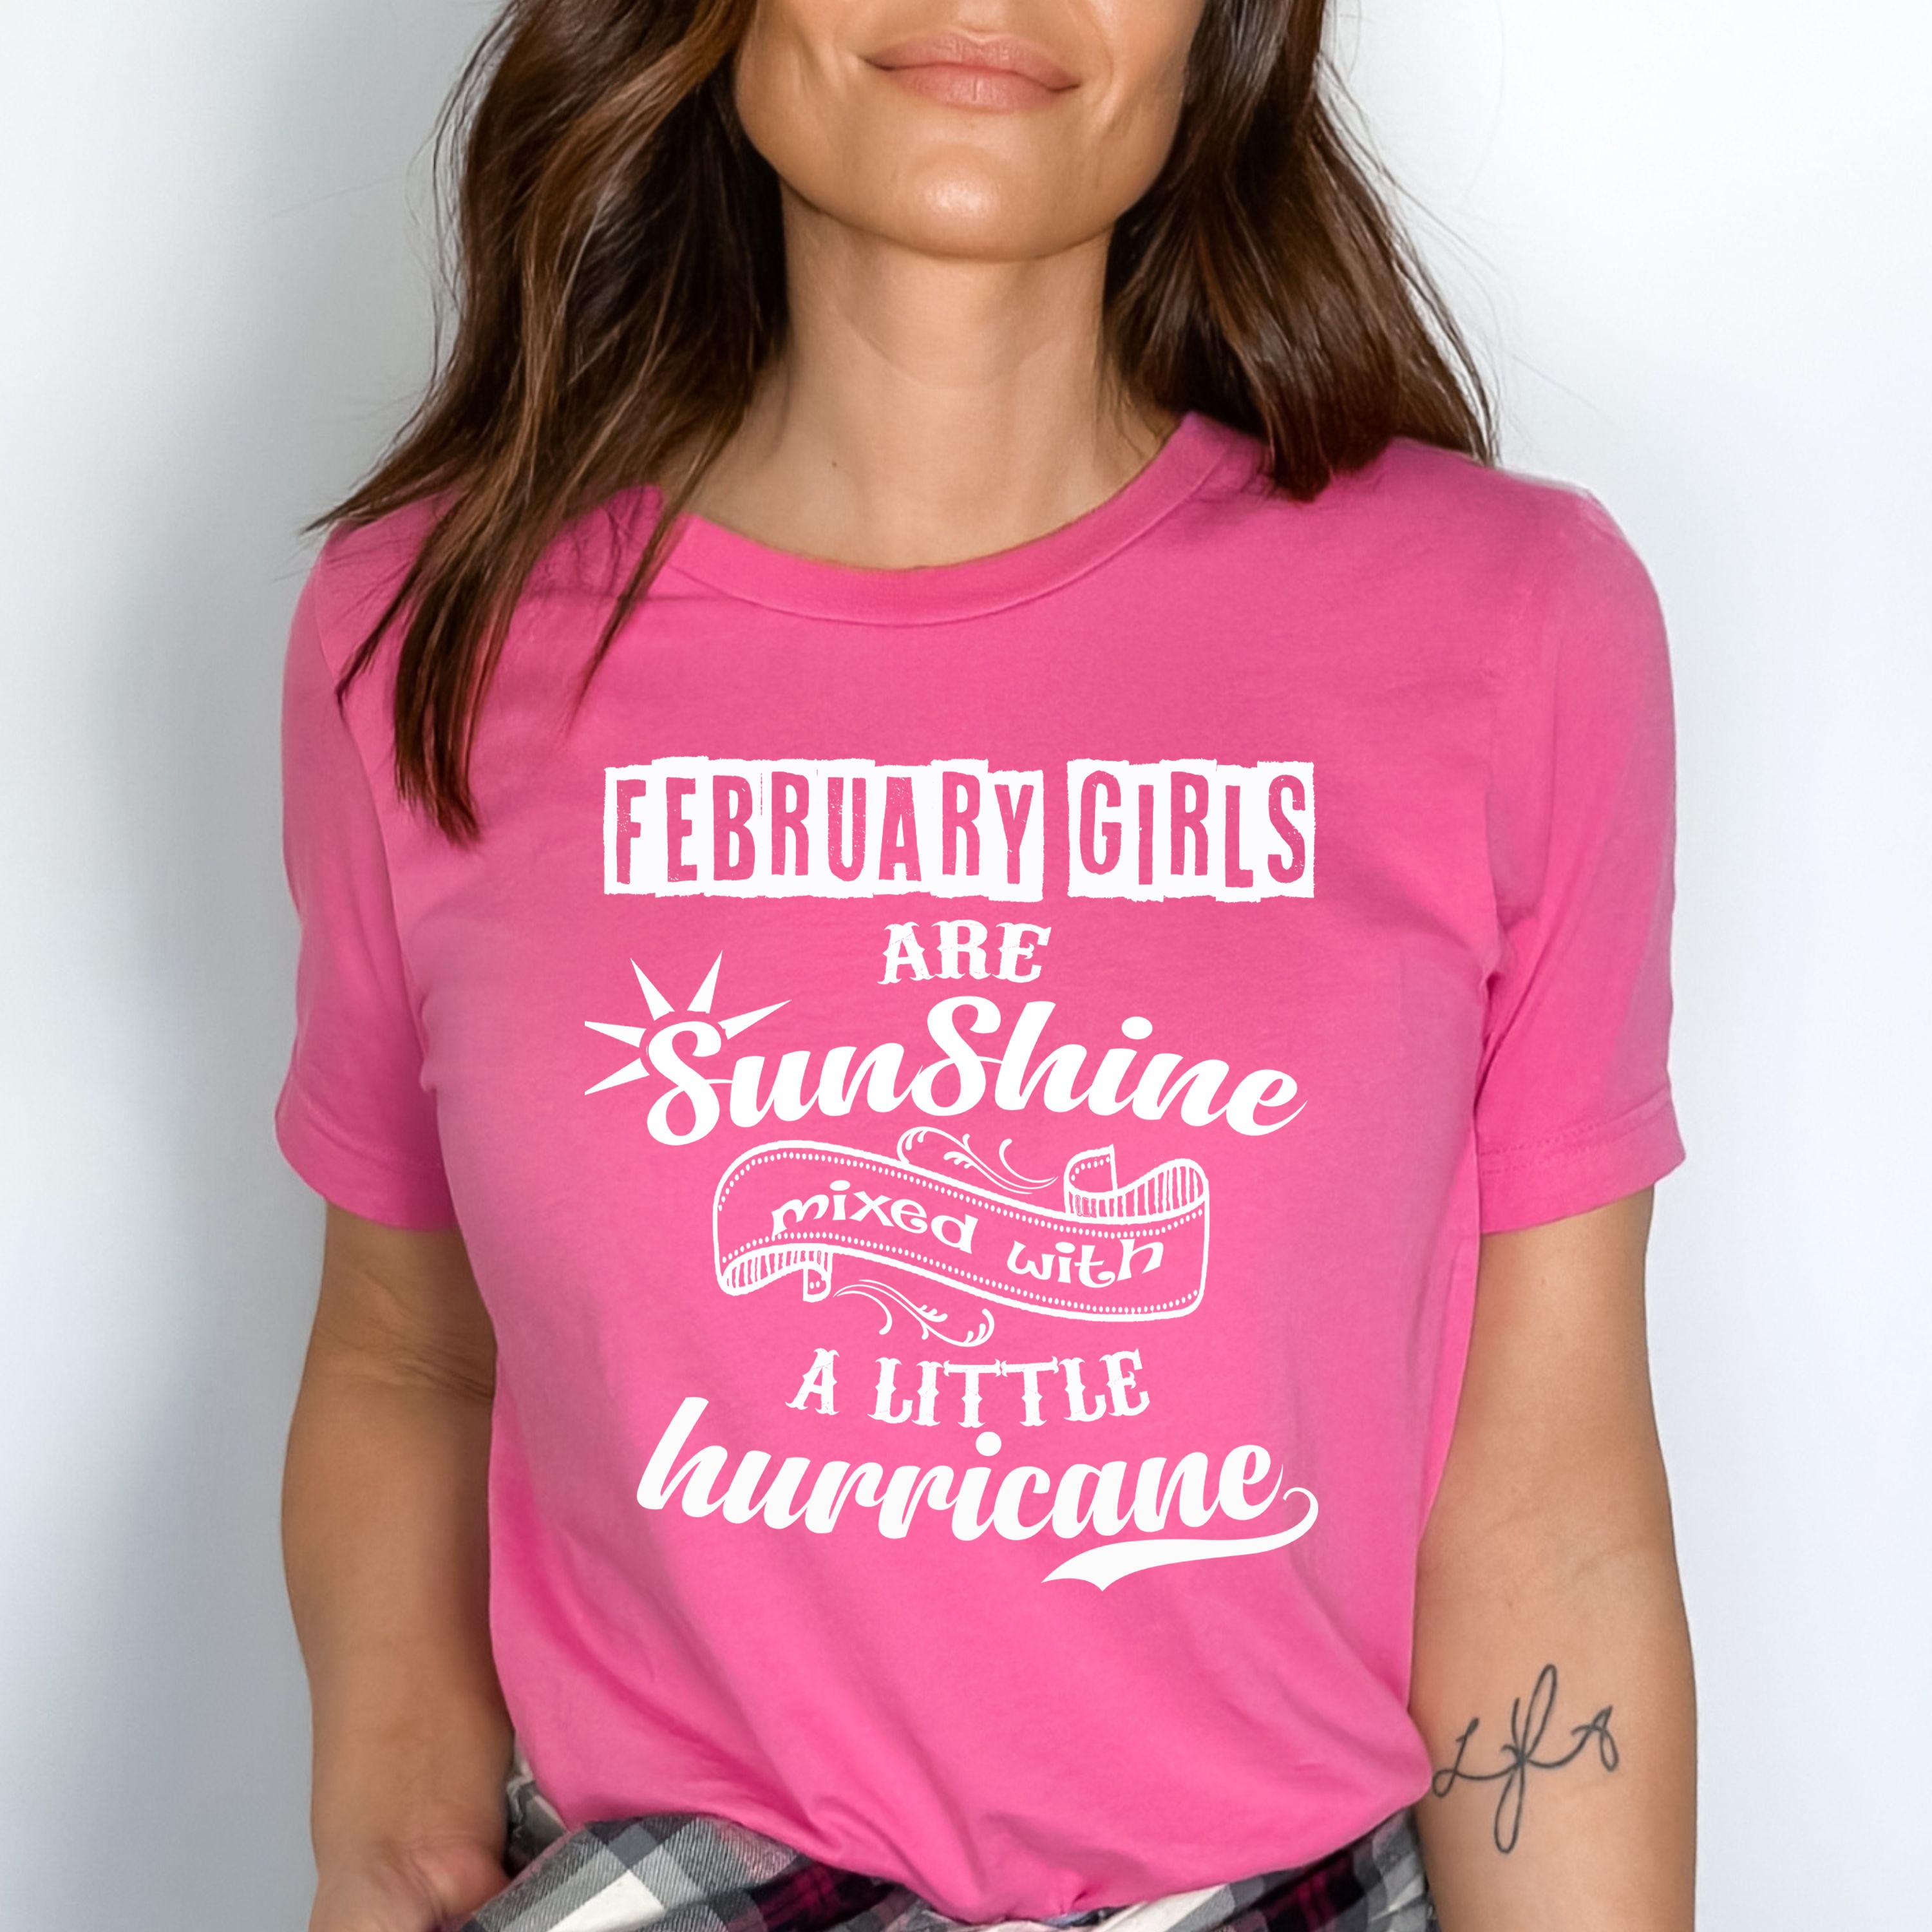 "February Girls Are Sunshine Mixed With Hurricane" Buy All Colors.